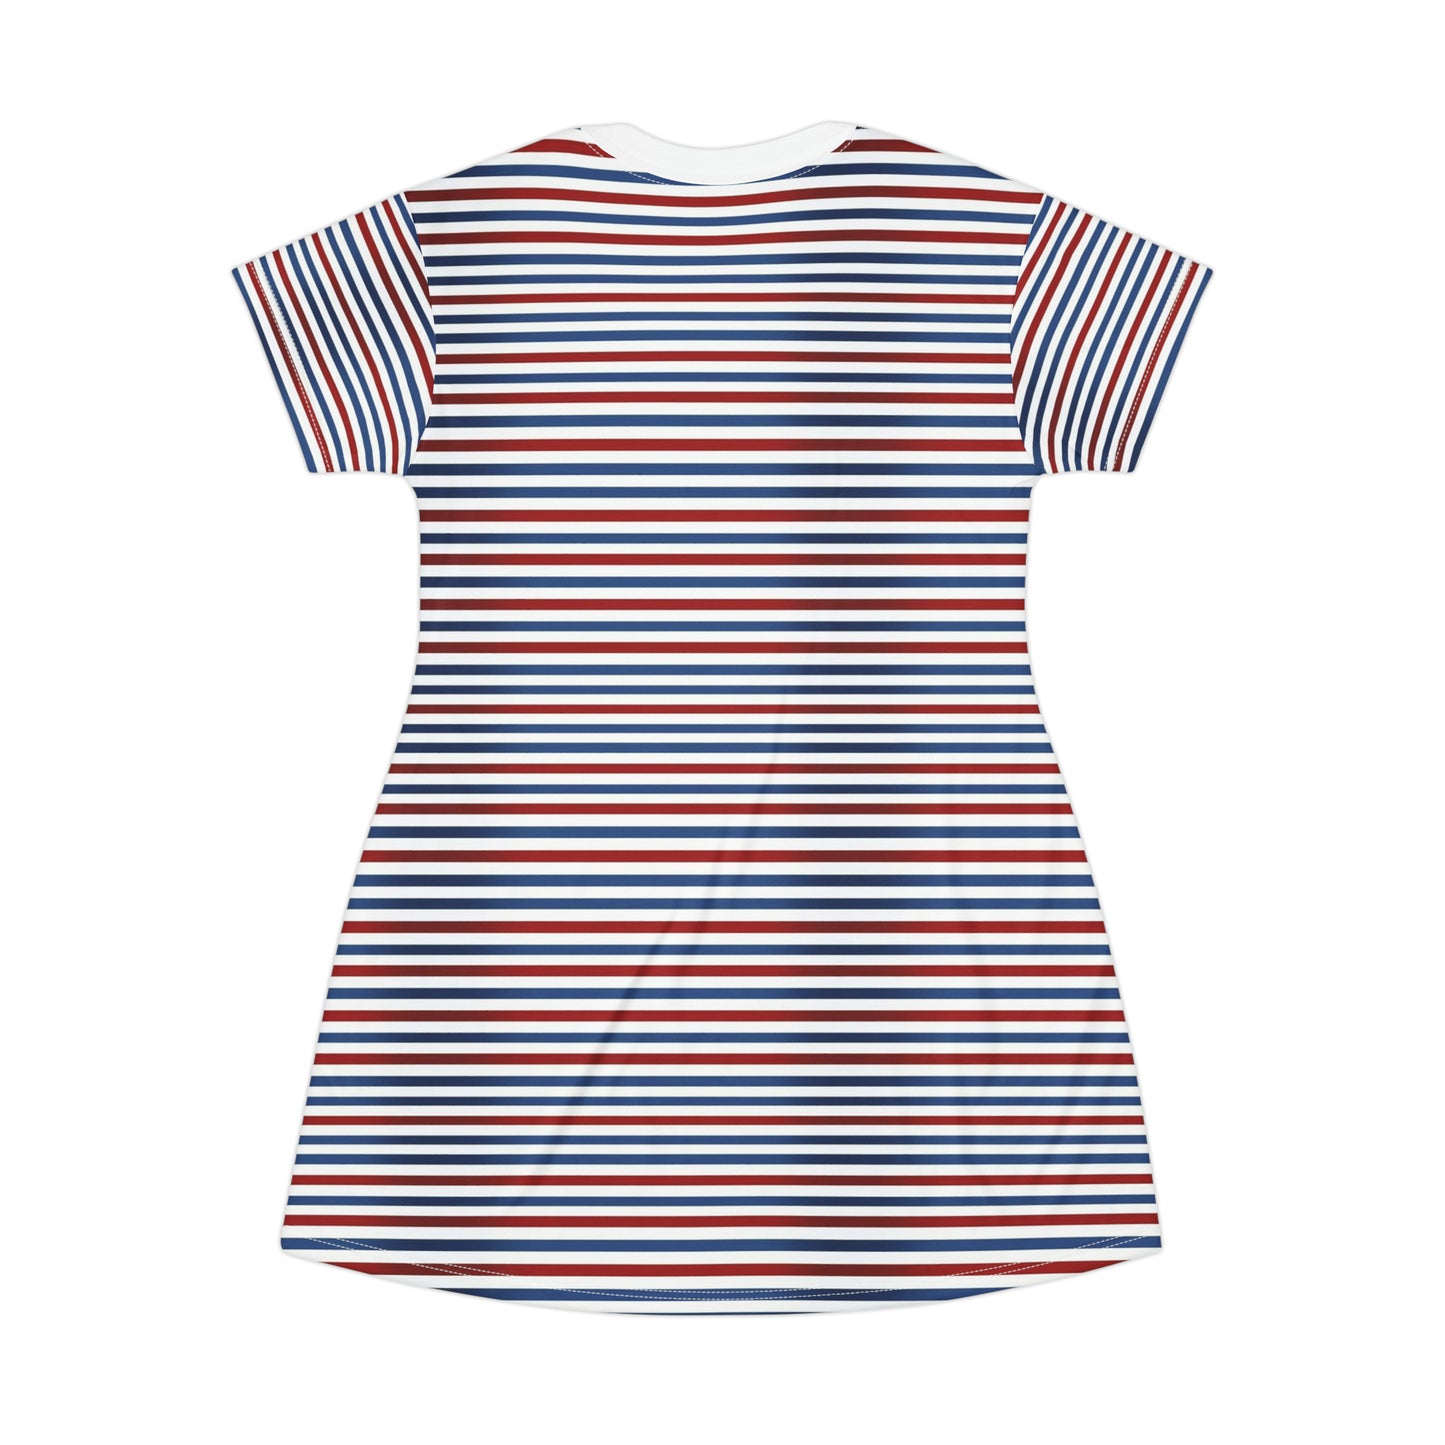 Red White Blue Striped Tshirt Dress, American Women Summer Beach Cute Party Casual Designer Short Sleeve Girls Ladies Cover Up Tee Starcove Fashion